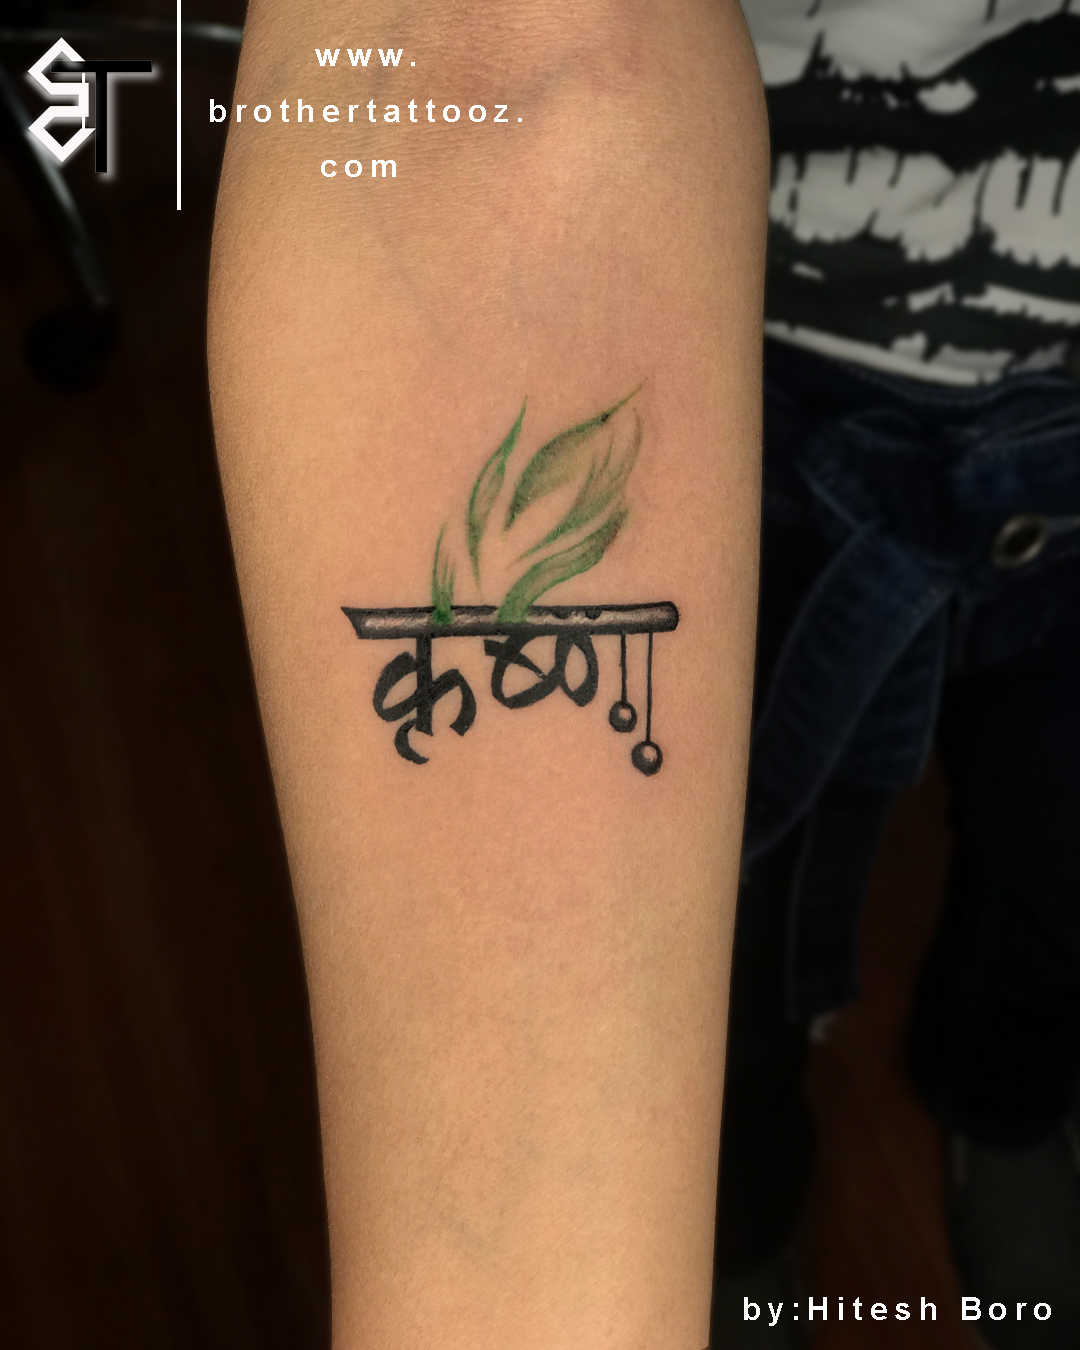 Flute tattoo : Inked by Hitesh kalyani : At pin point tattoo studio :  Thanks for looking | Instagram